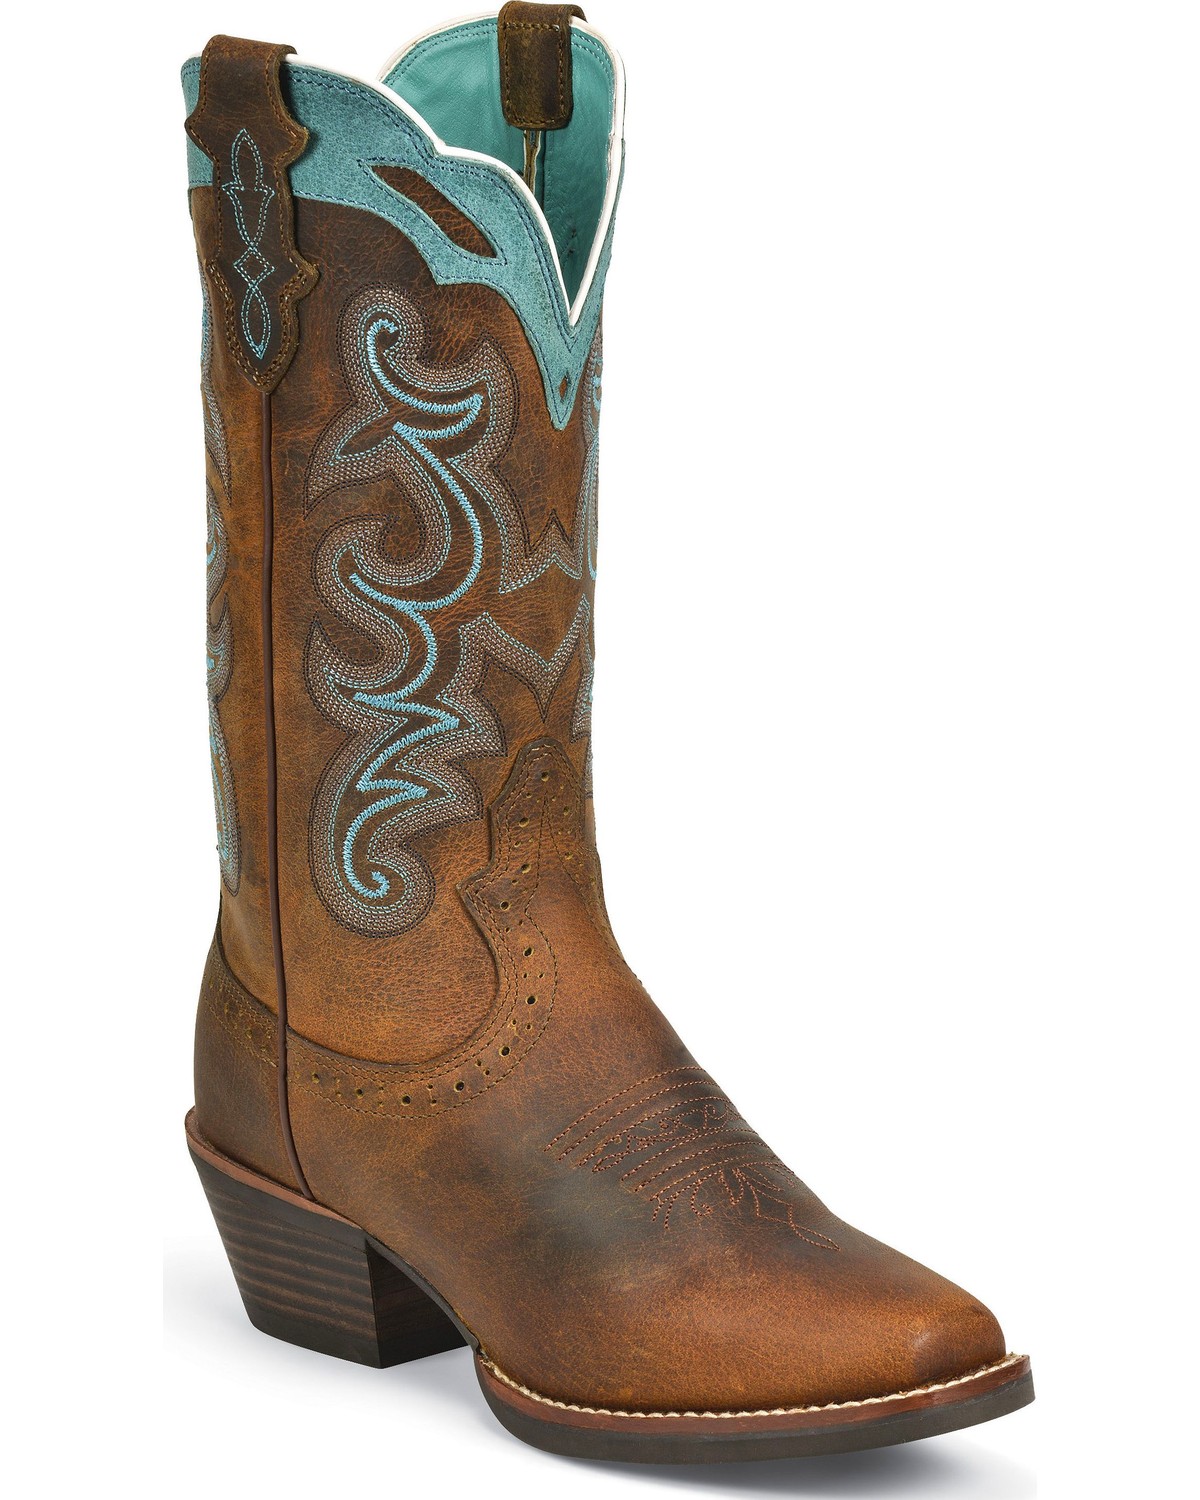 justin women's riding boots